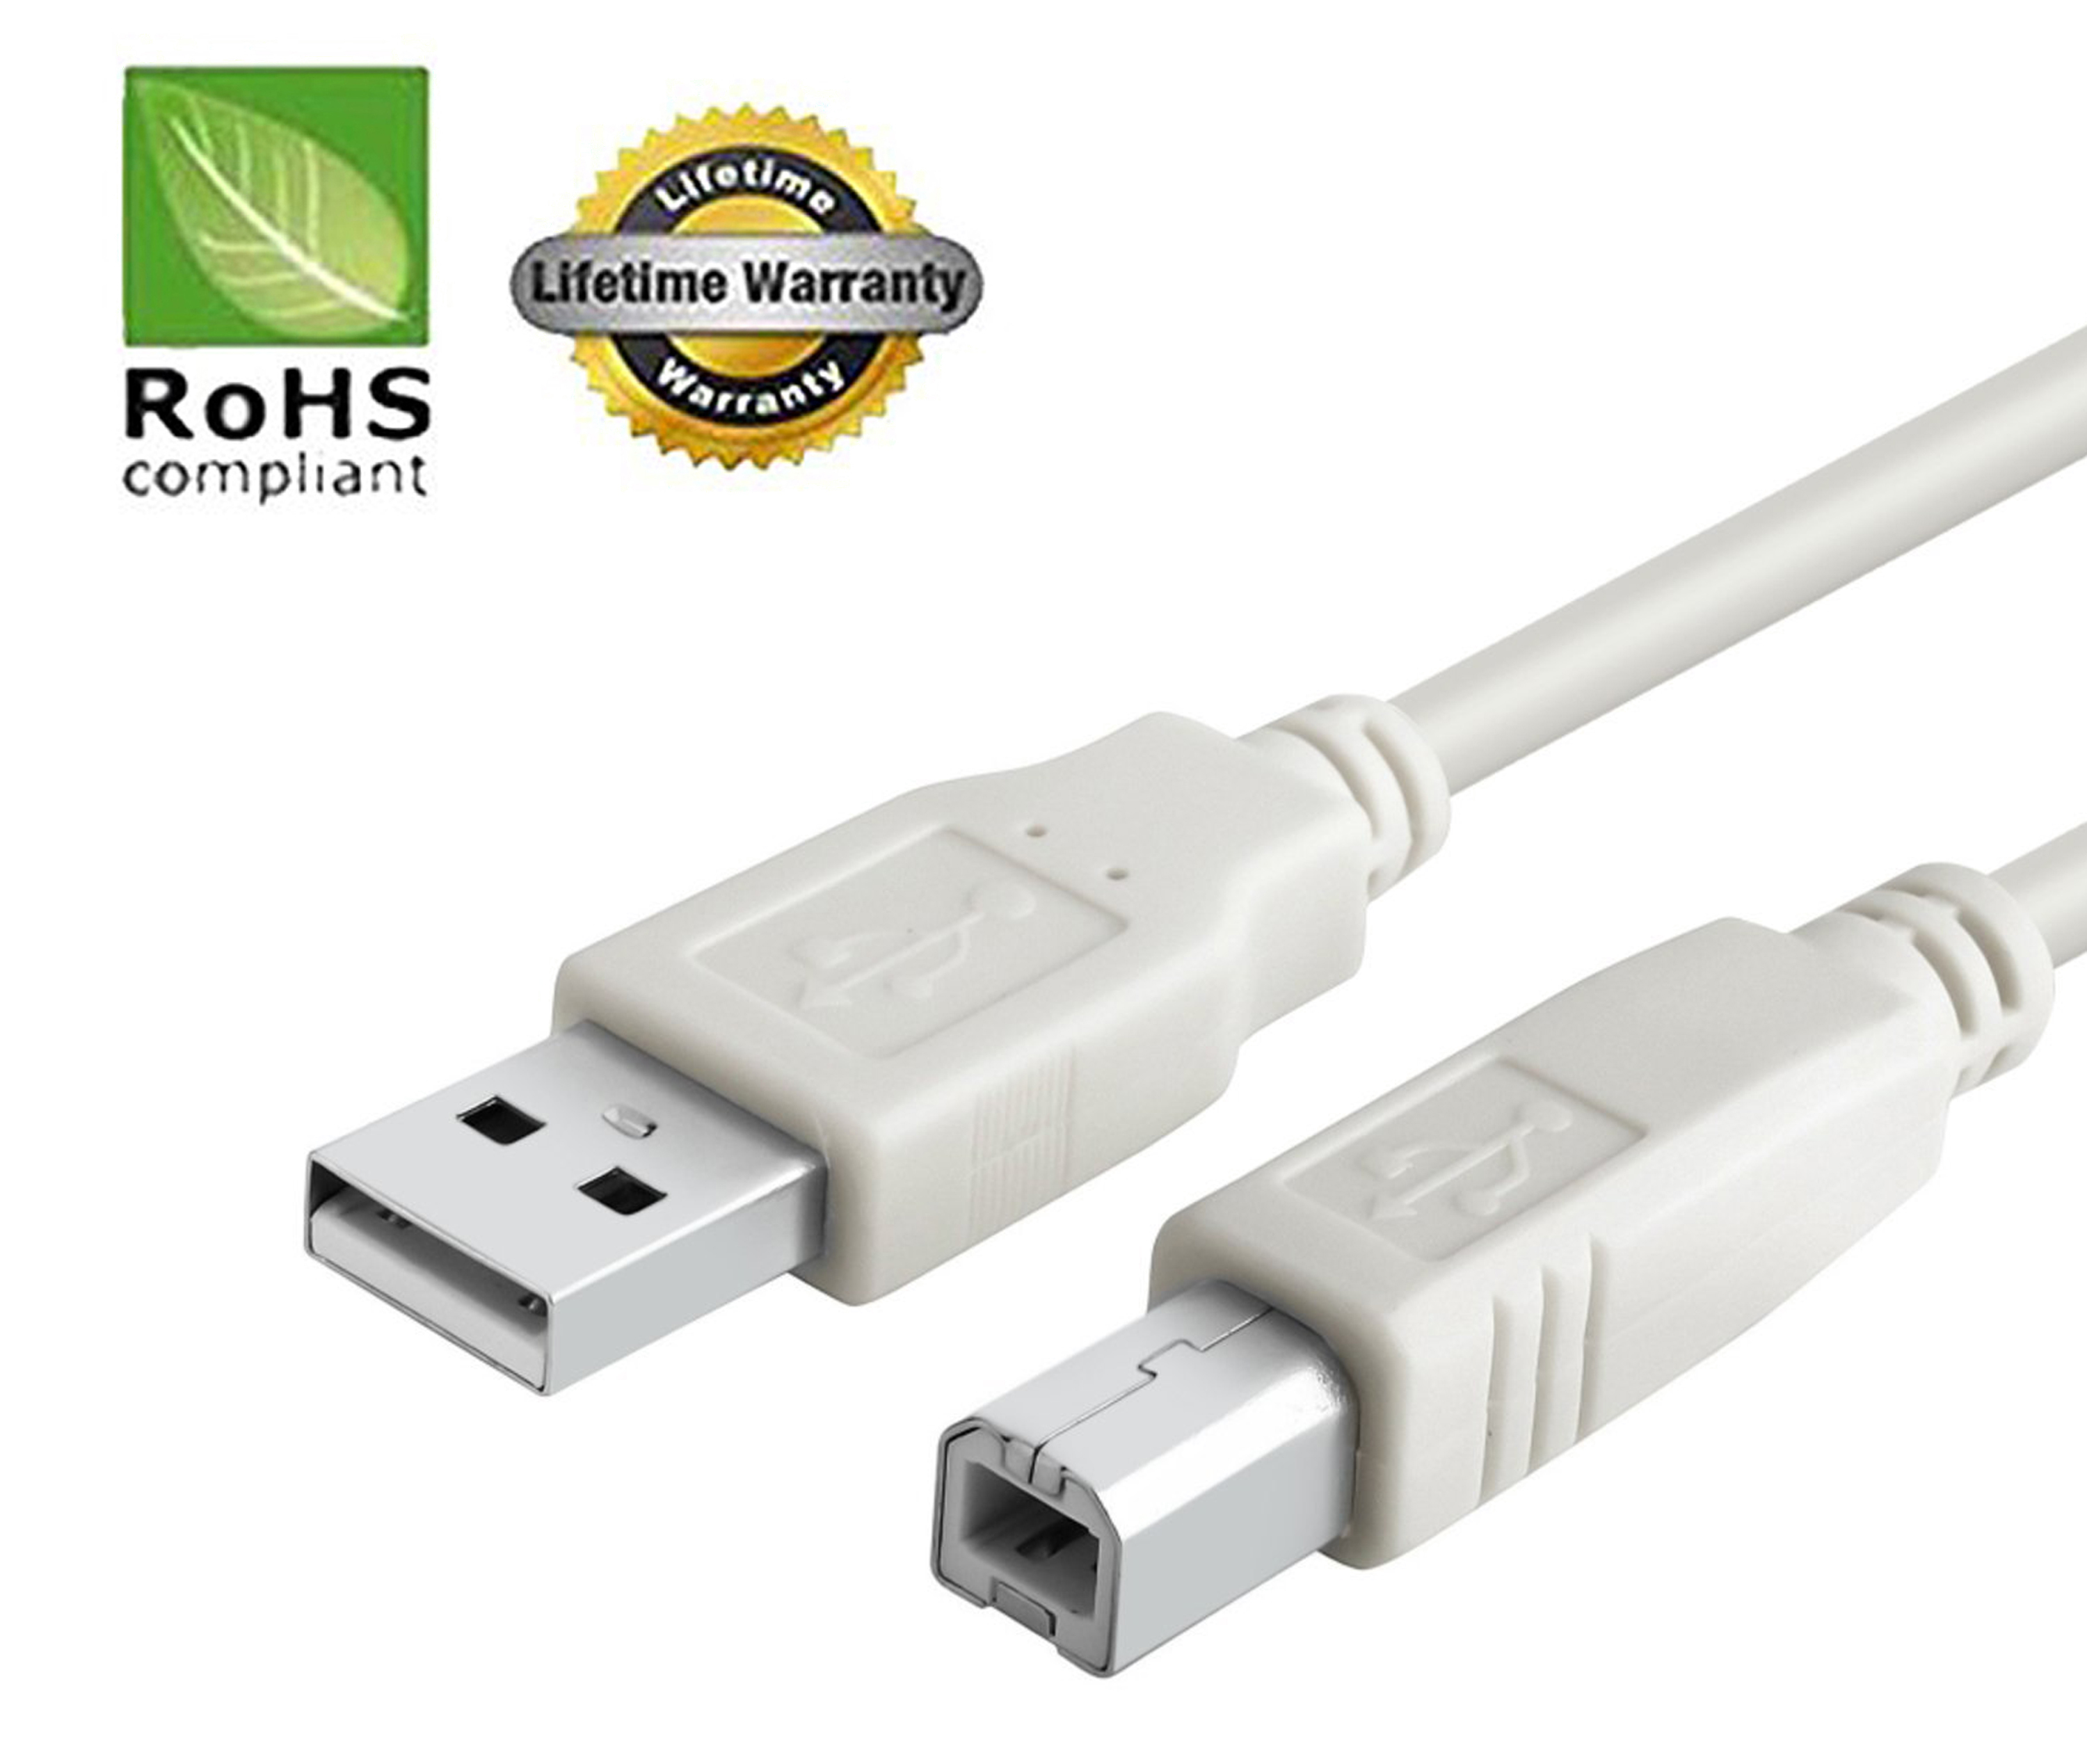 USB 2.0 Cable - A-Male to B-Male for Centrance HiFi-M8 (Specific Models Only) - 10 FT /IVORY - image 1 of 5